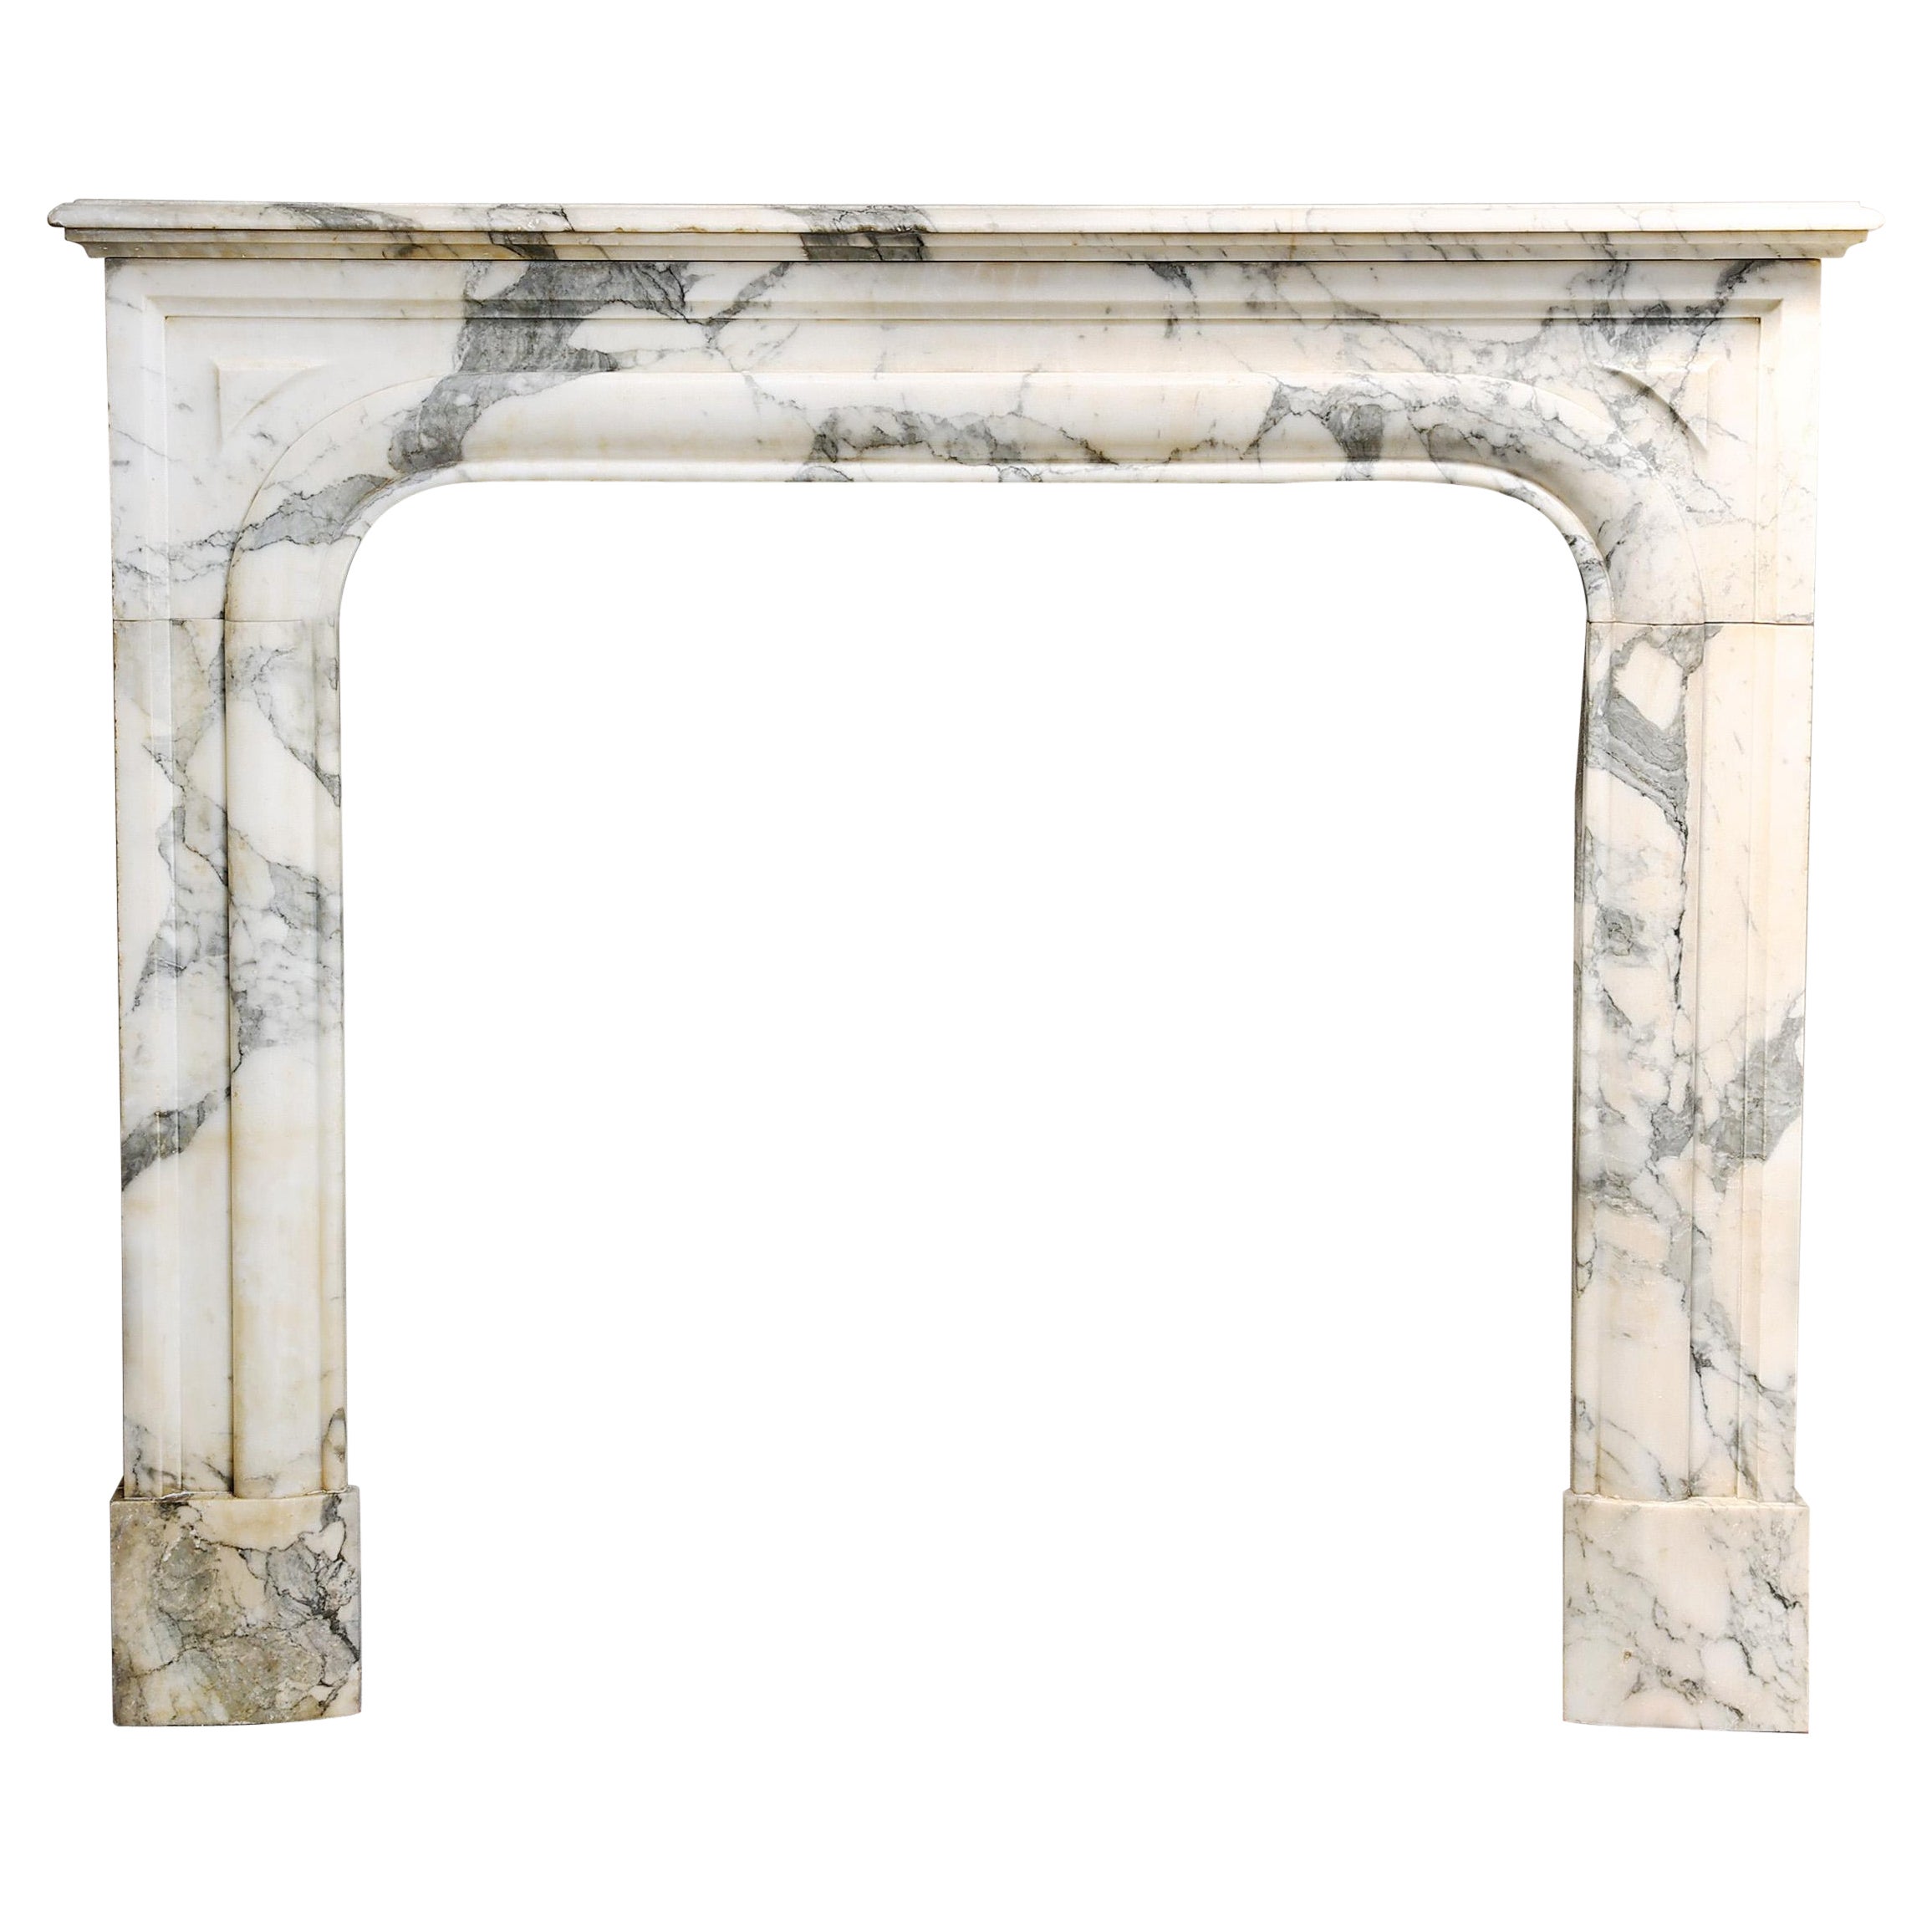 Louis XIV style mantle surround of Arabescato marble from the 19th century